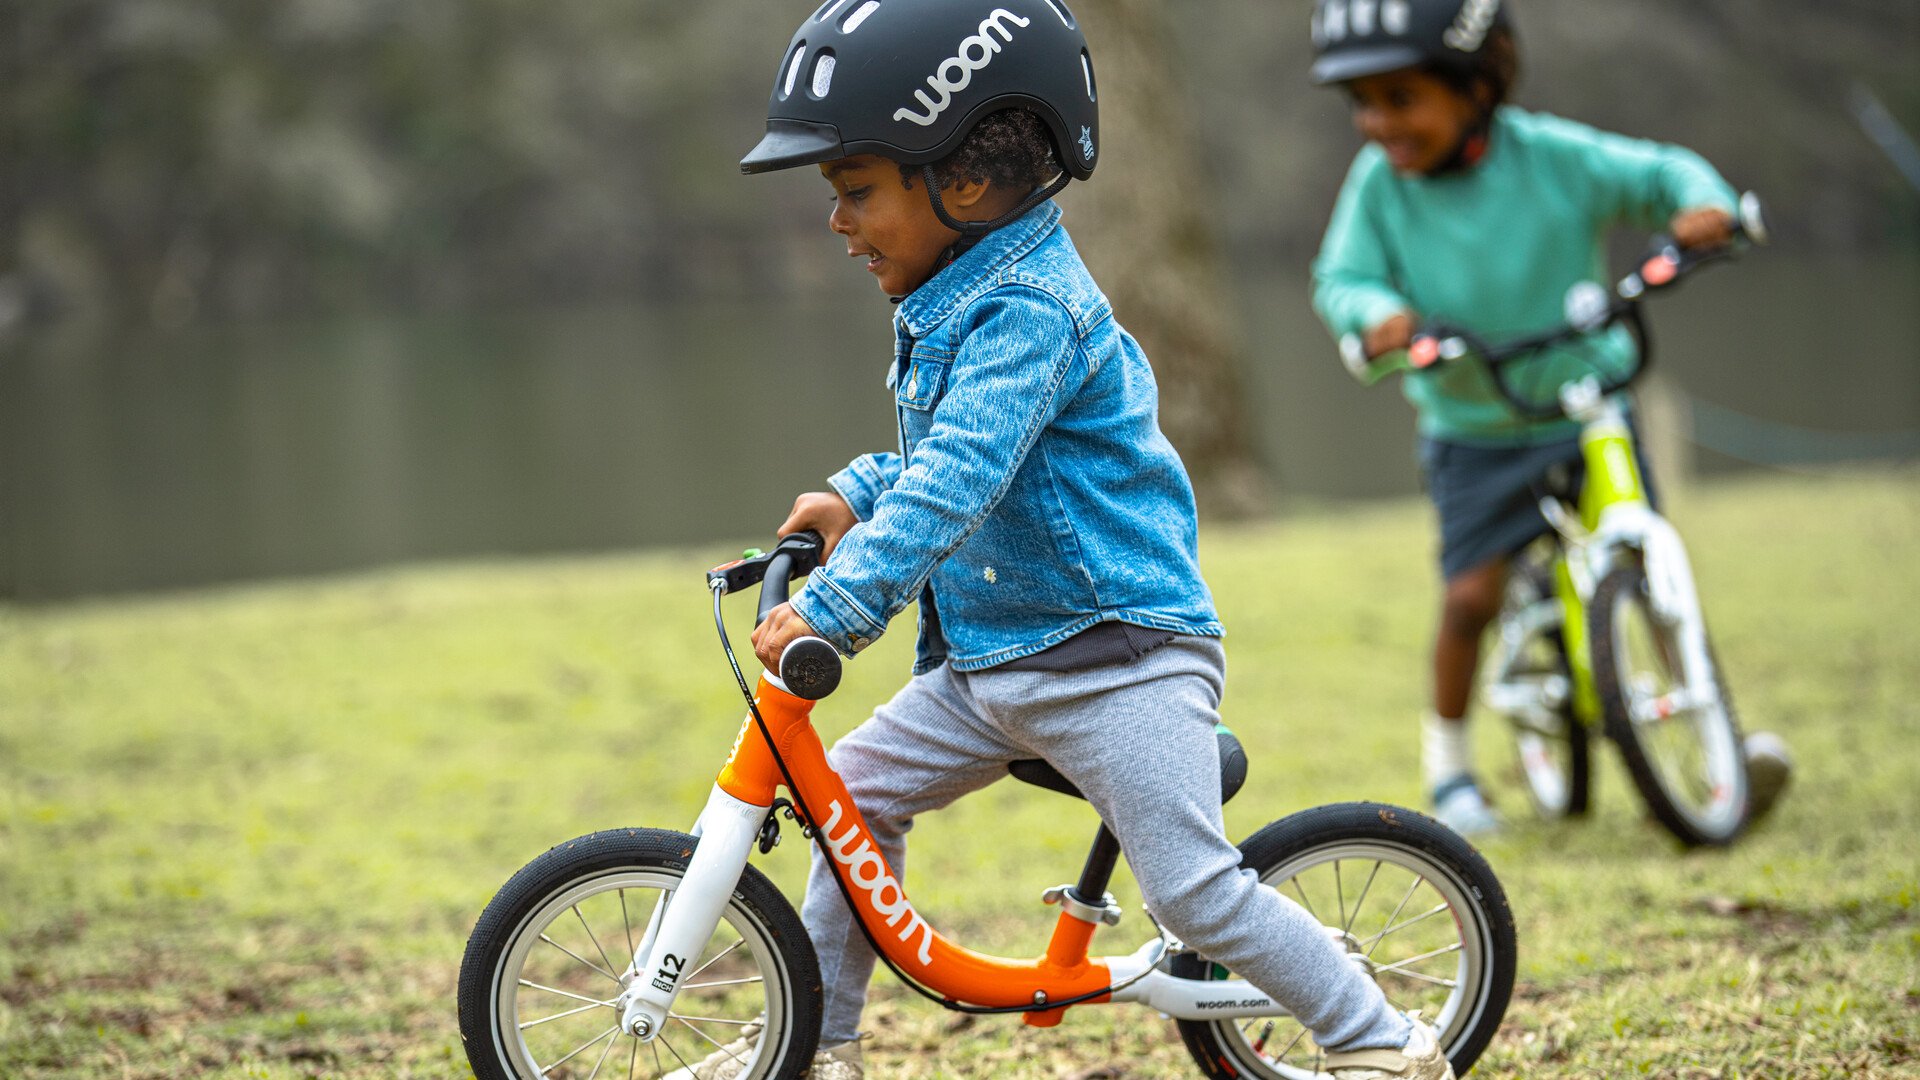 Two kids with black helmets ride orange and green woom balance bikes on some grass.